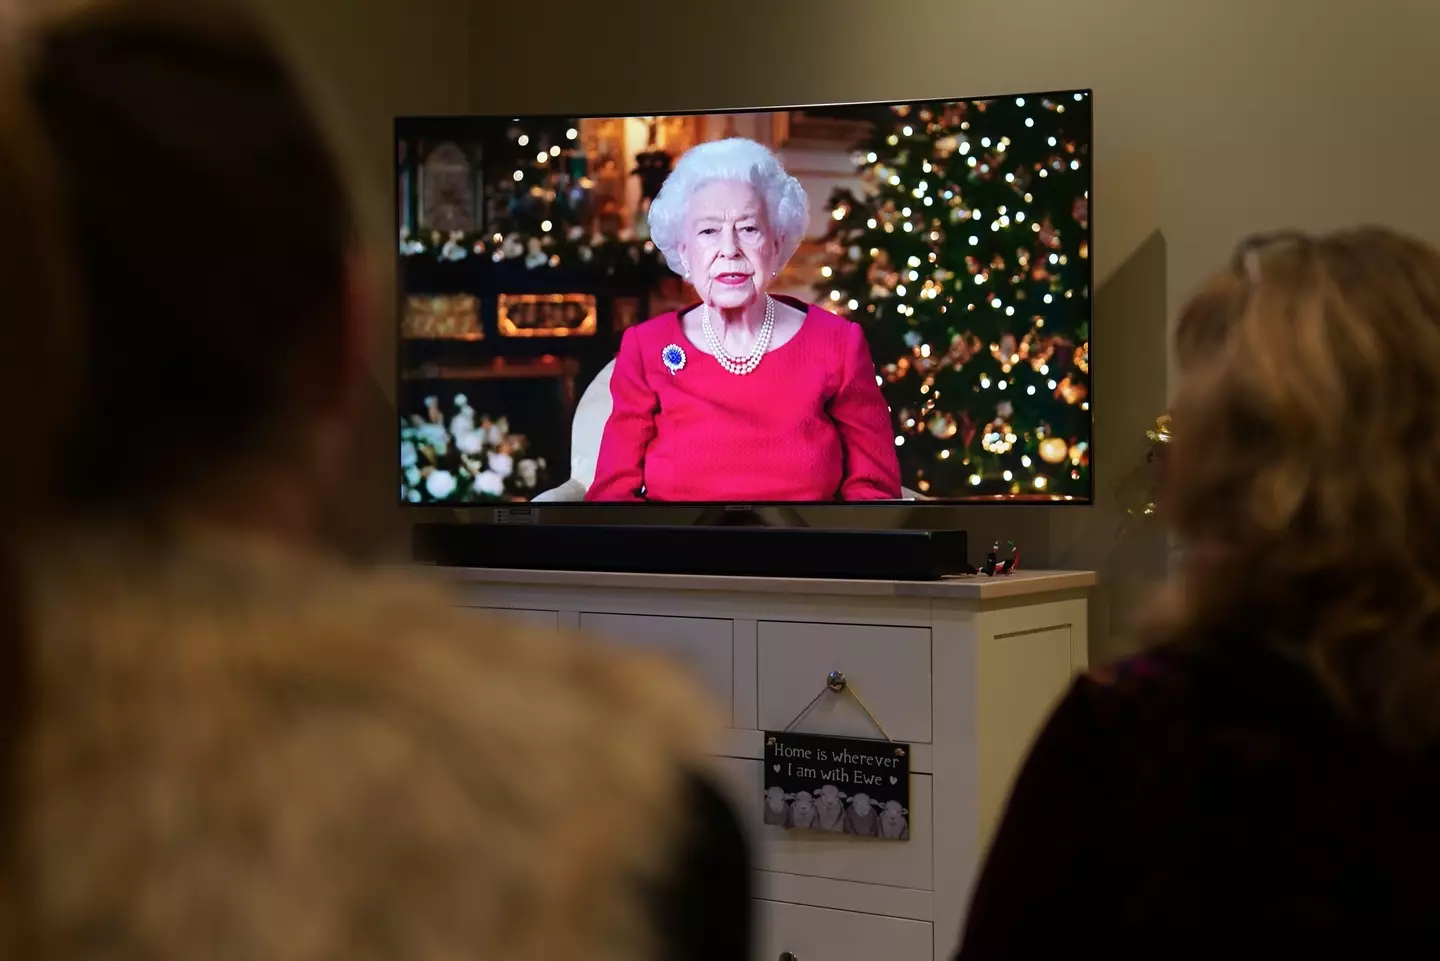 The Queen addressed the nation on Christmas Day at 3pm, as per tradition.